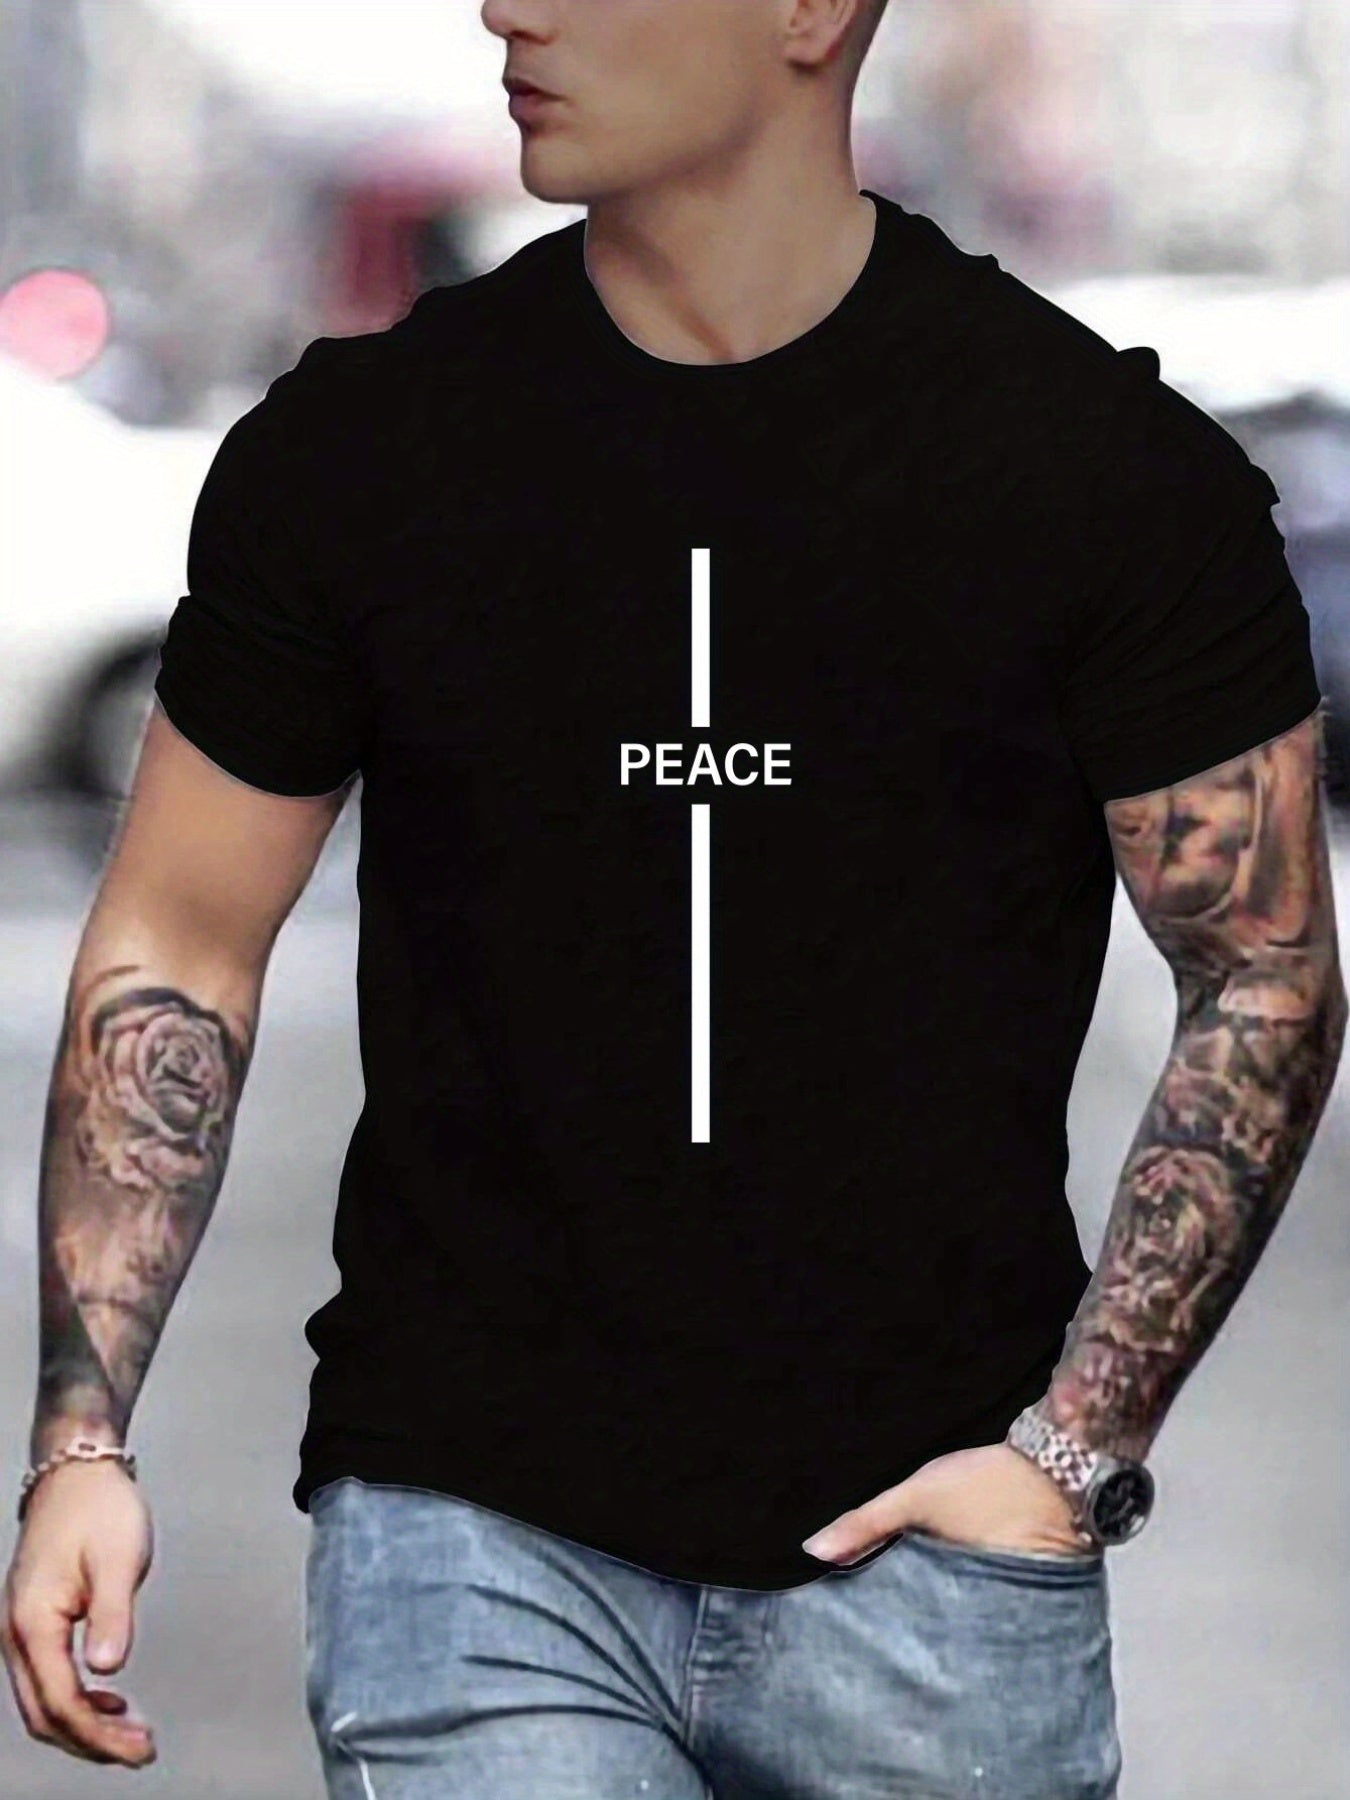 Men's Casual T-shirt With "PEACE" Print, Short Sleeve Crew Neck Tee For Summer